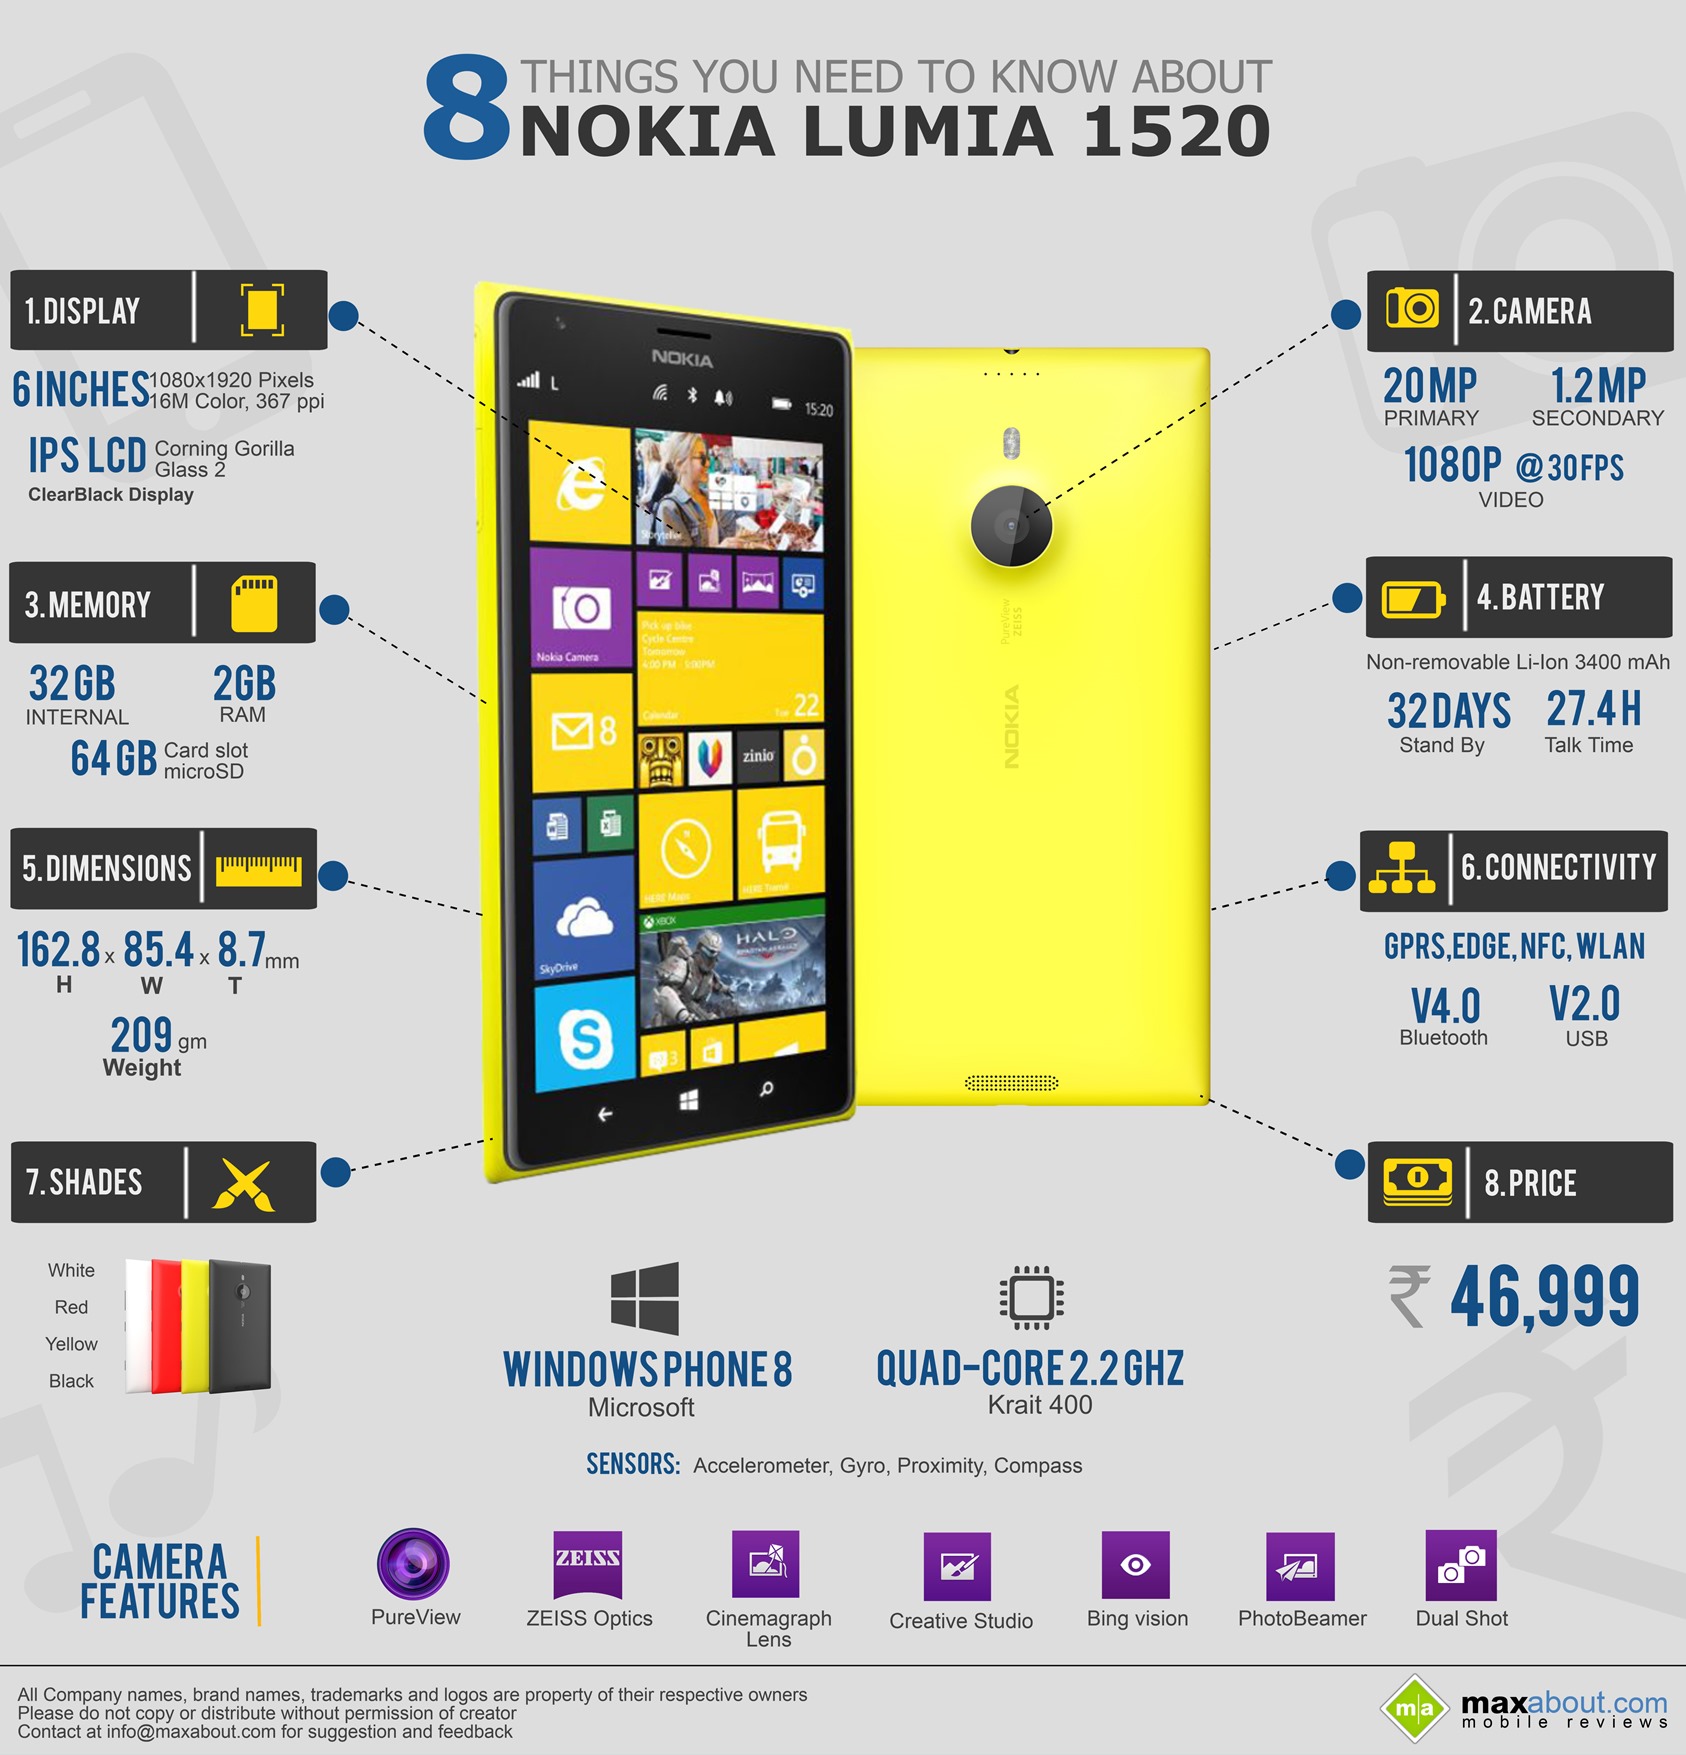 Things You Need To Know About Nokia Lumia